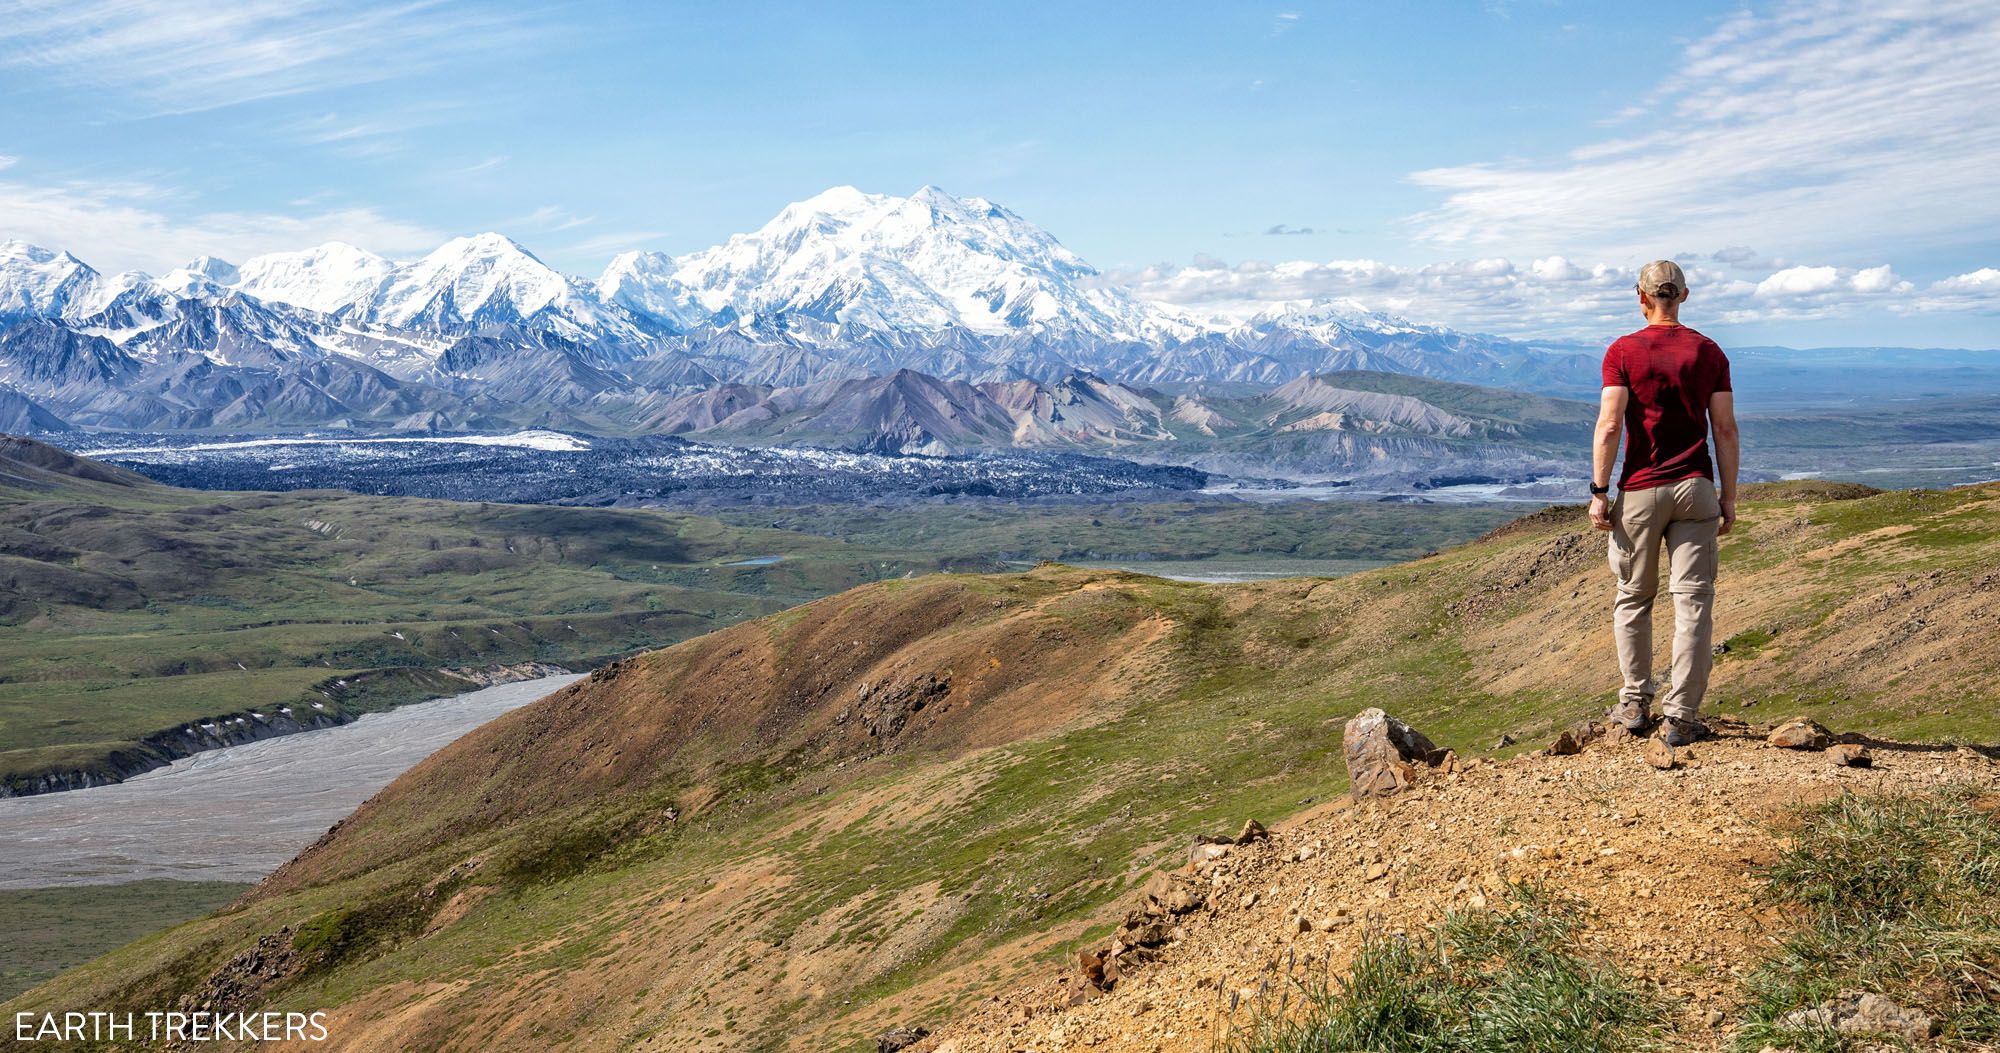 Featured image for “5 Reasons Why You Should Visit Eielson Visitor Center on Denali Park Road”